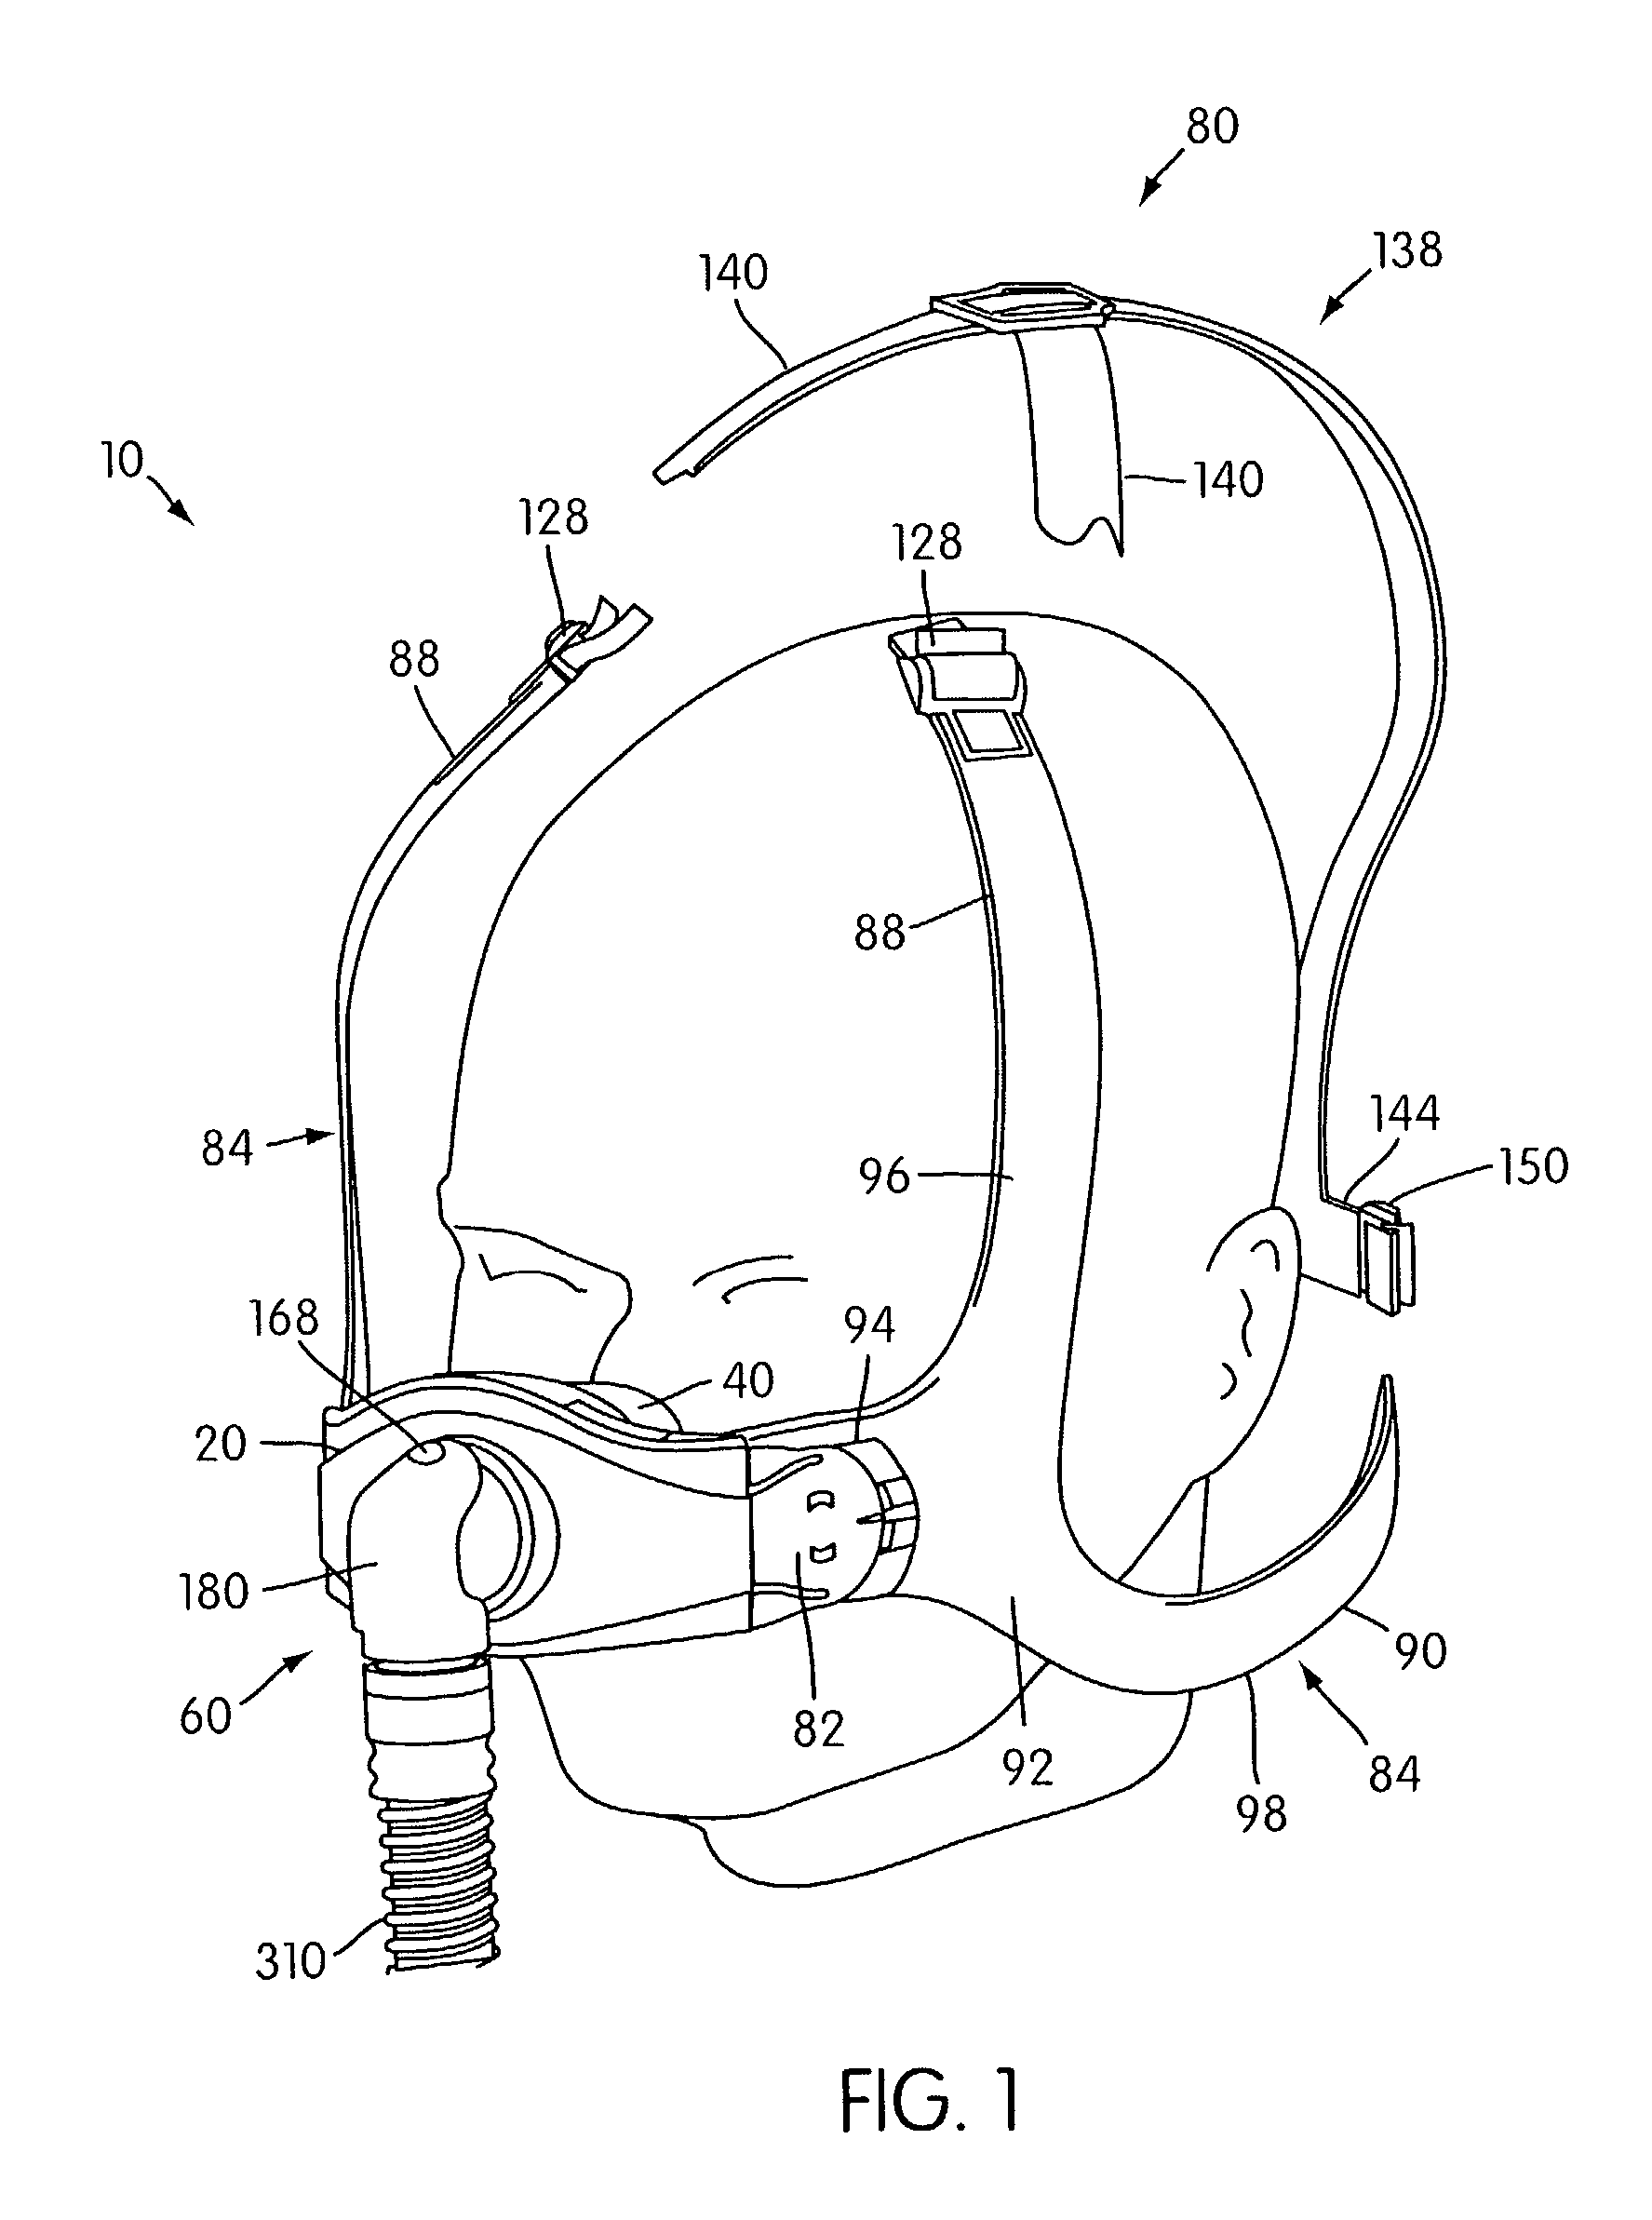 Ergonomic and adjustable respiratory mask assembly with frame